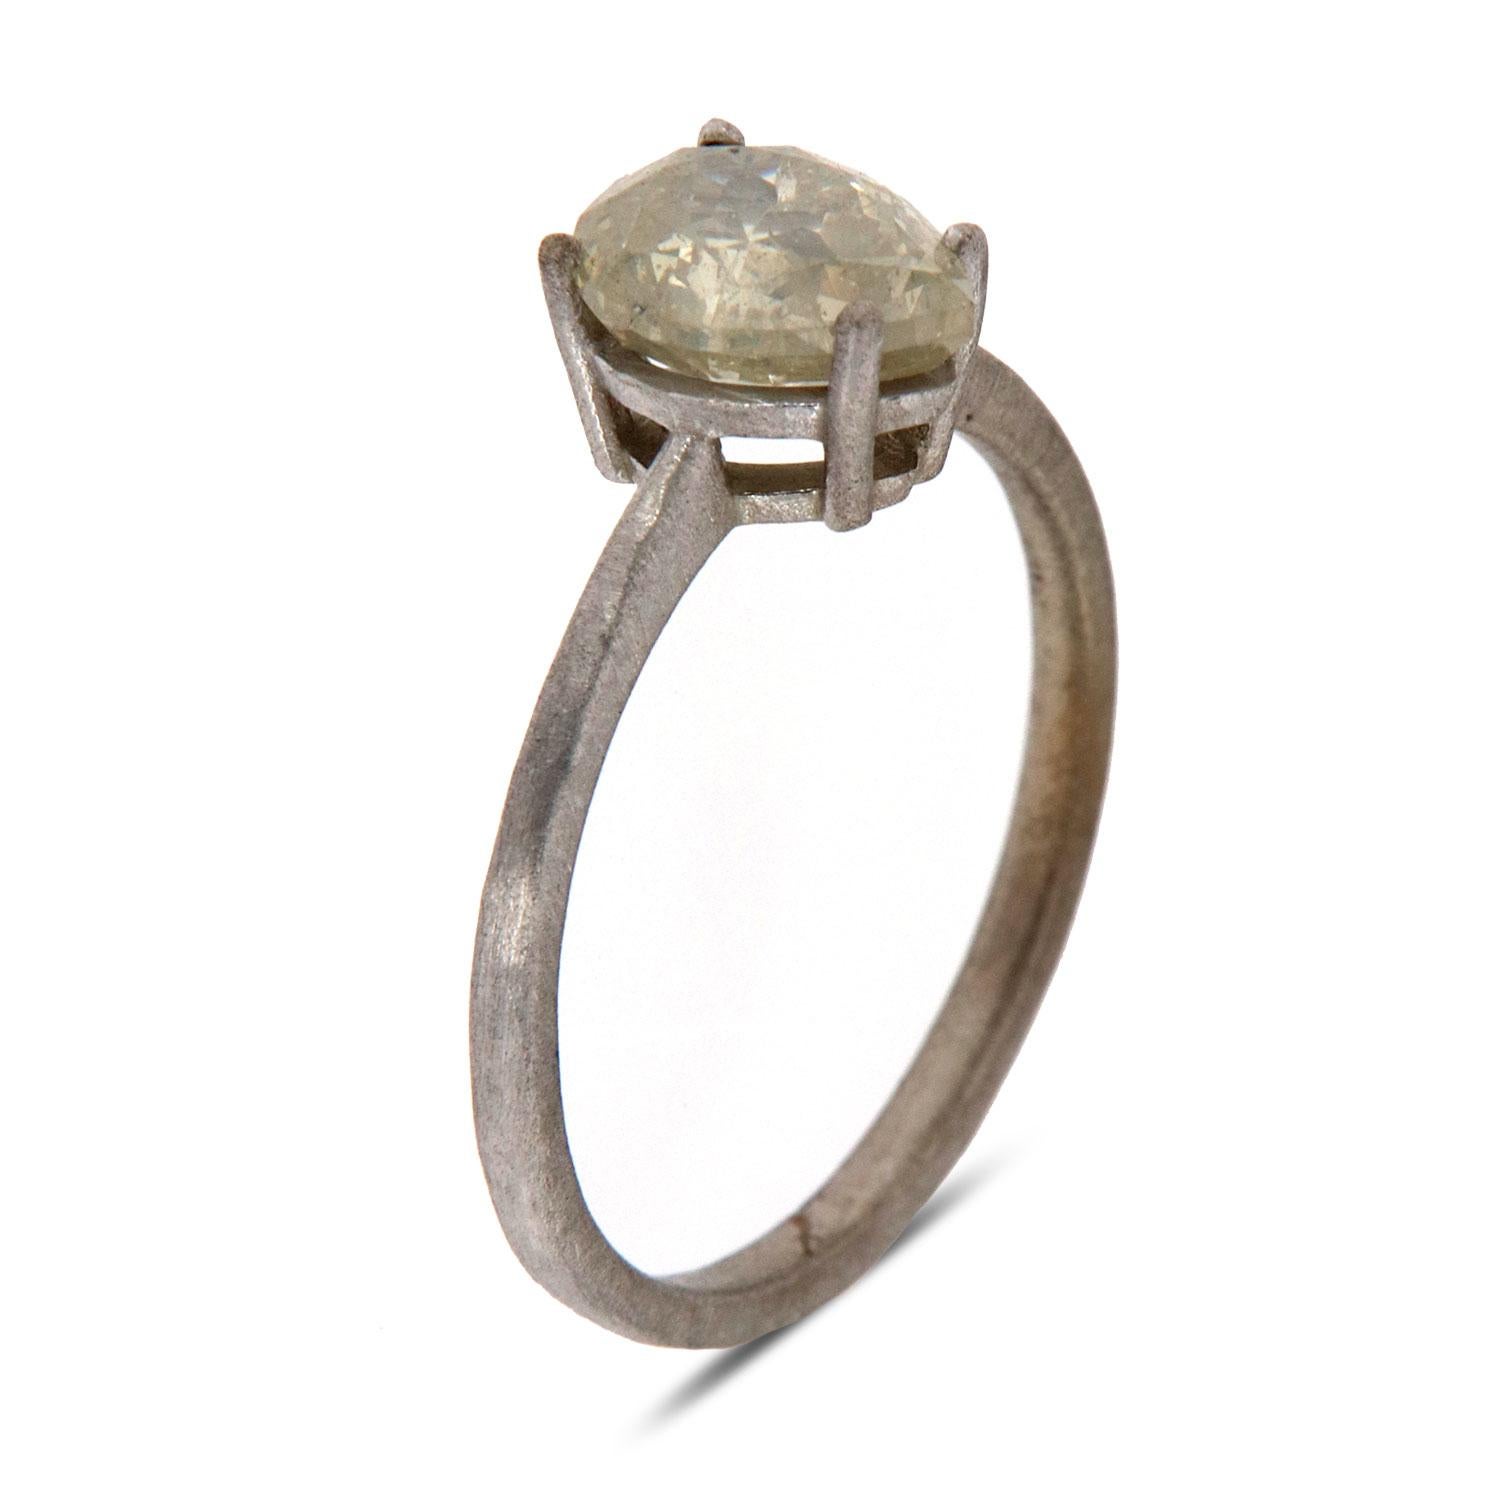 This Earthy design solitaire ring features a 1.35 -Carat 